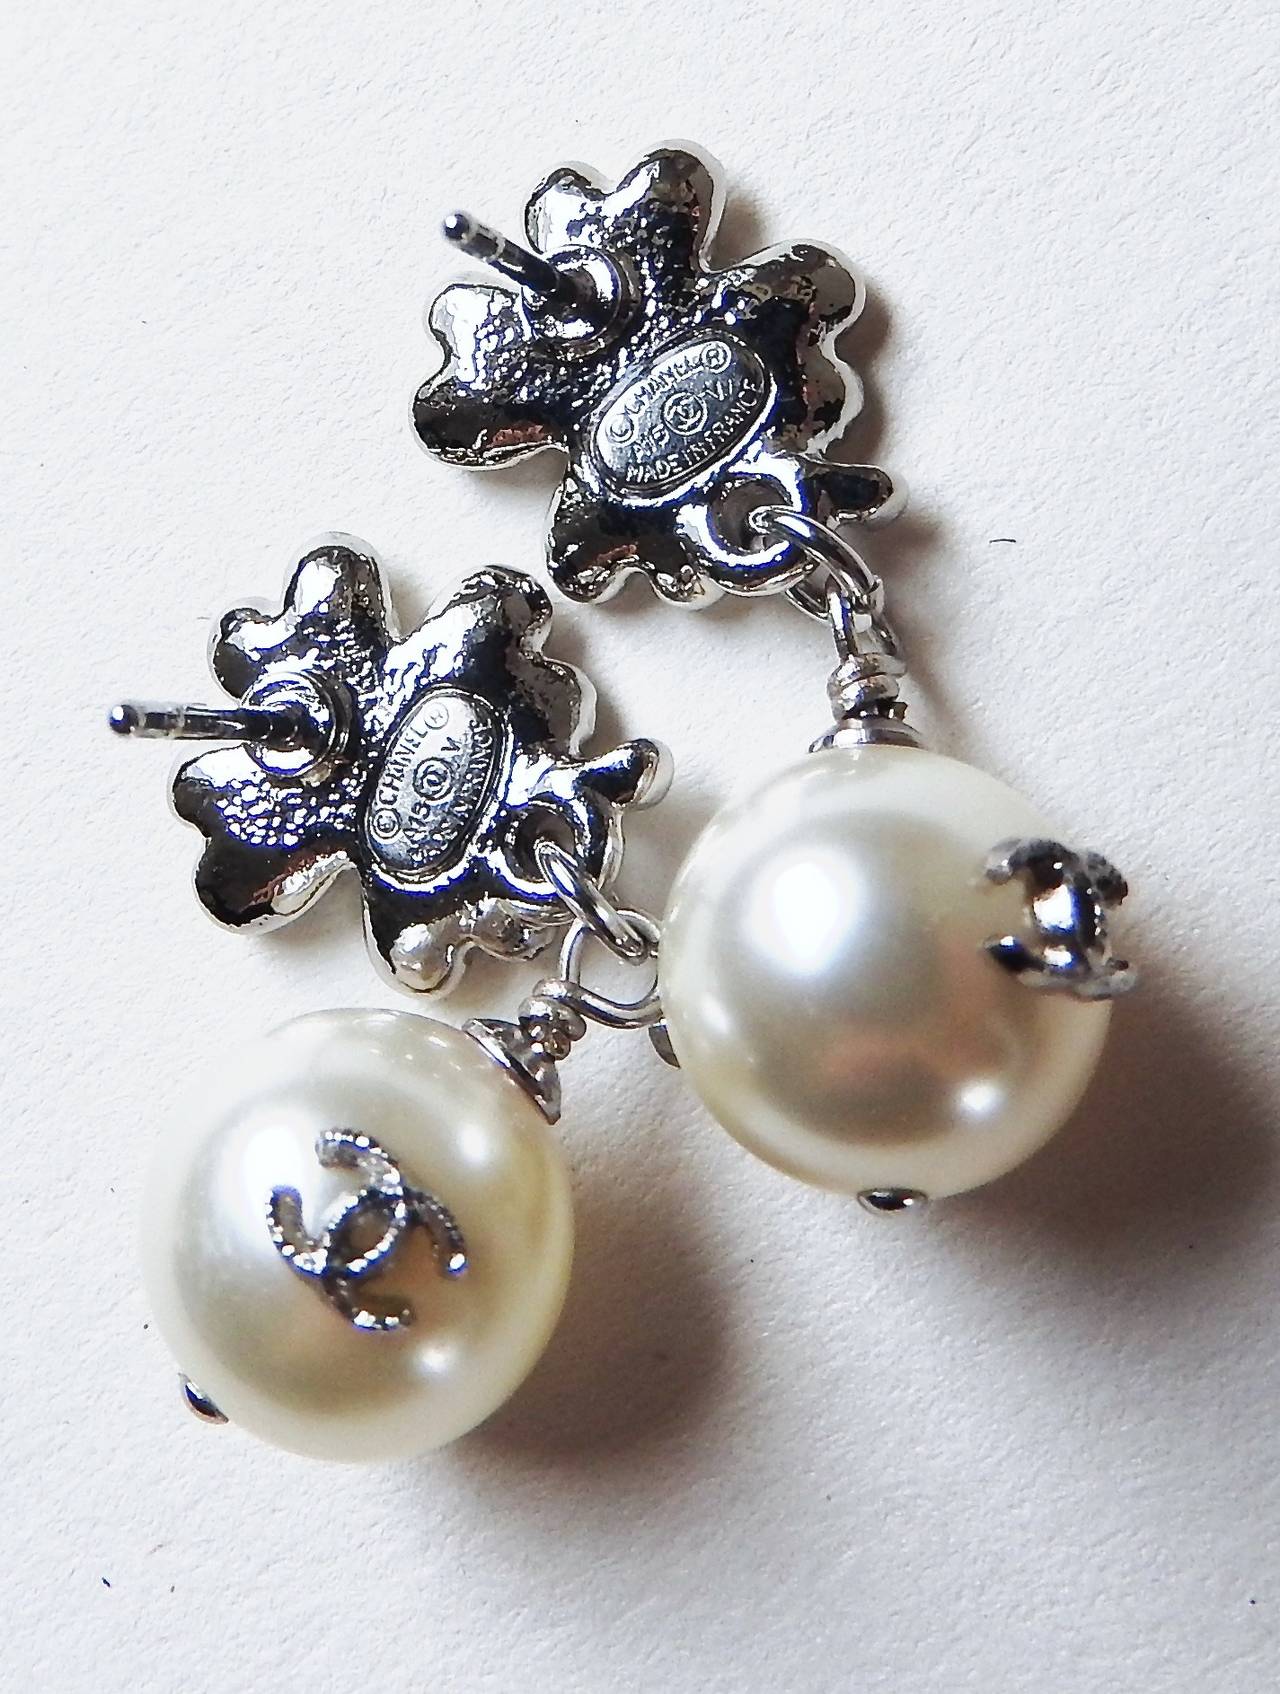 THESE earrings are so beautifully done with finest quality of Swarovski crystals and glass pearls and adorned with 2 silver CC logo on two sides of each pearl. 
When wearing them the CC logos would show on two side of the earrings, not as shown in